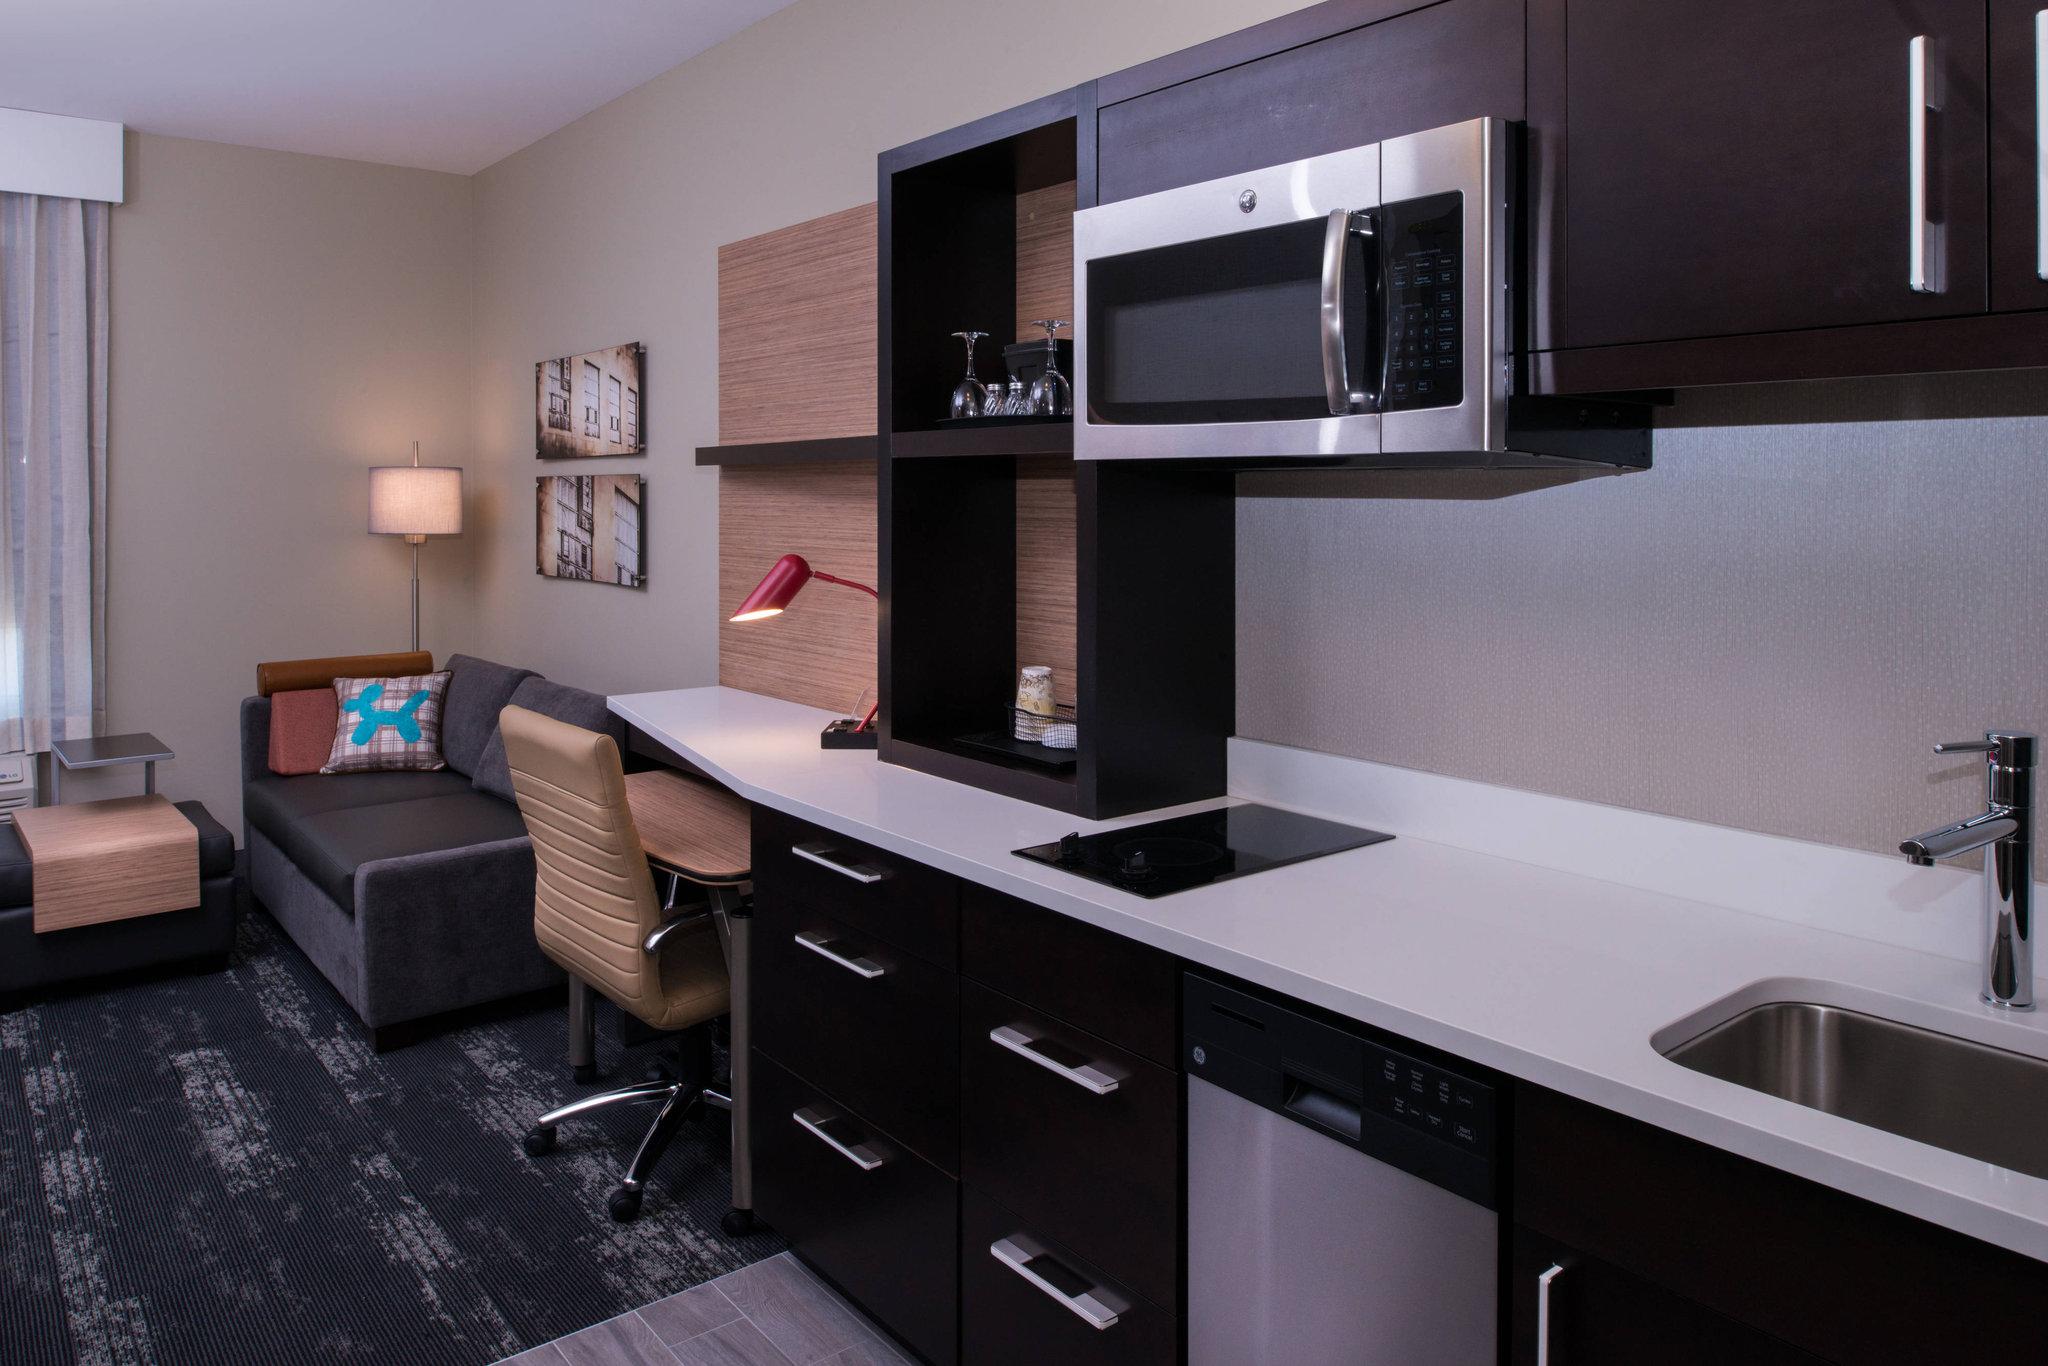 TownePlace Suites by Marriott Saskatoon image 1